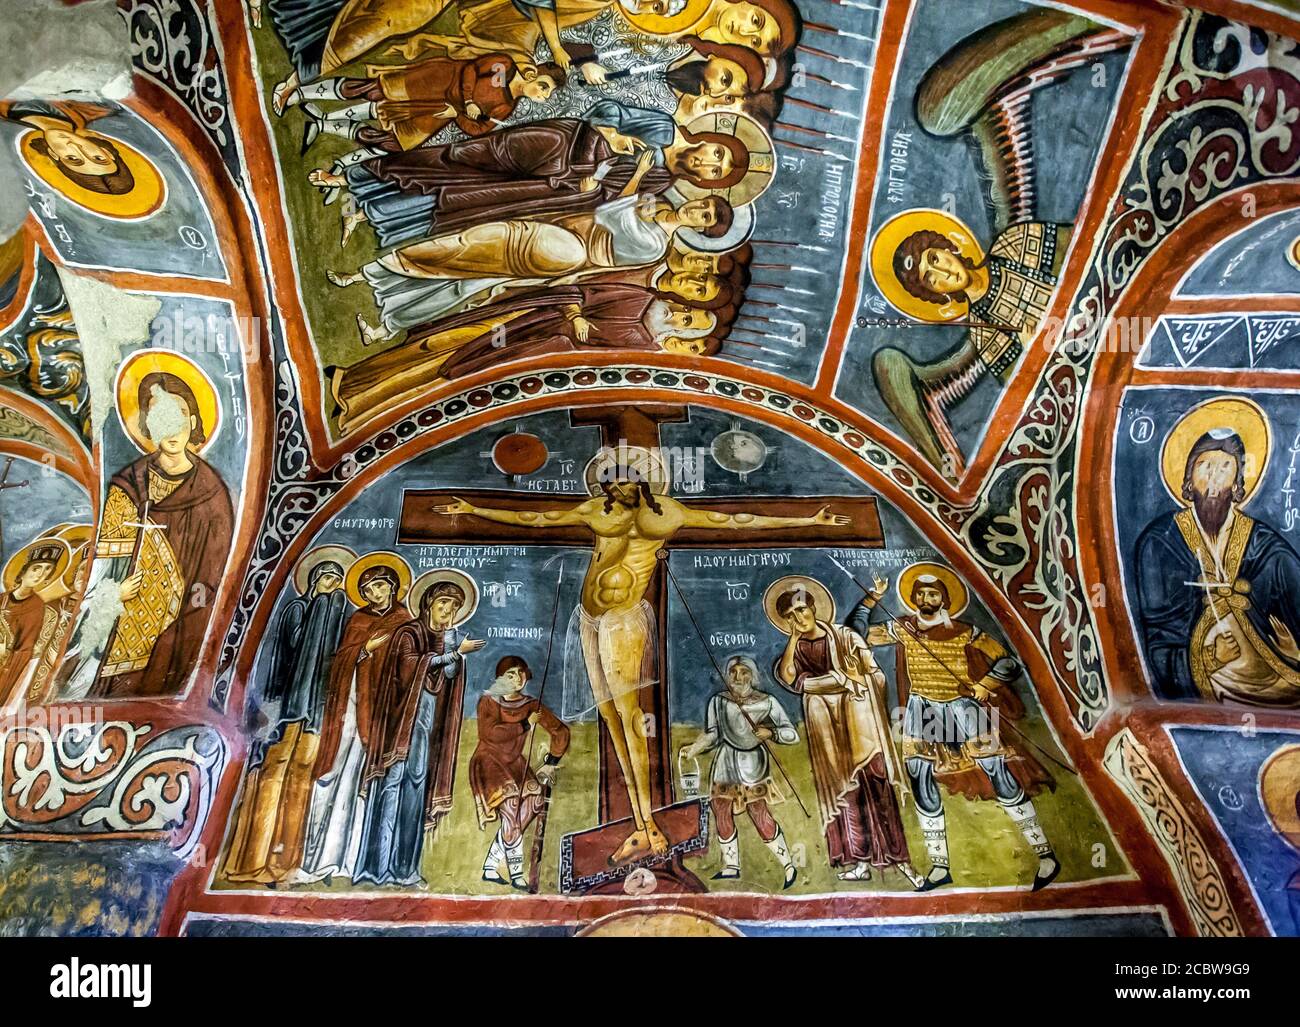 A beautiful fresco showing the Crucifixion of Christ at the Karanlik Kilise (Dark Church) at the Open Air Museum at Goreme in Cappadocia in Turkey. Stock Photo